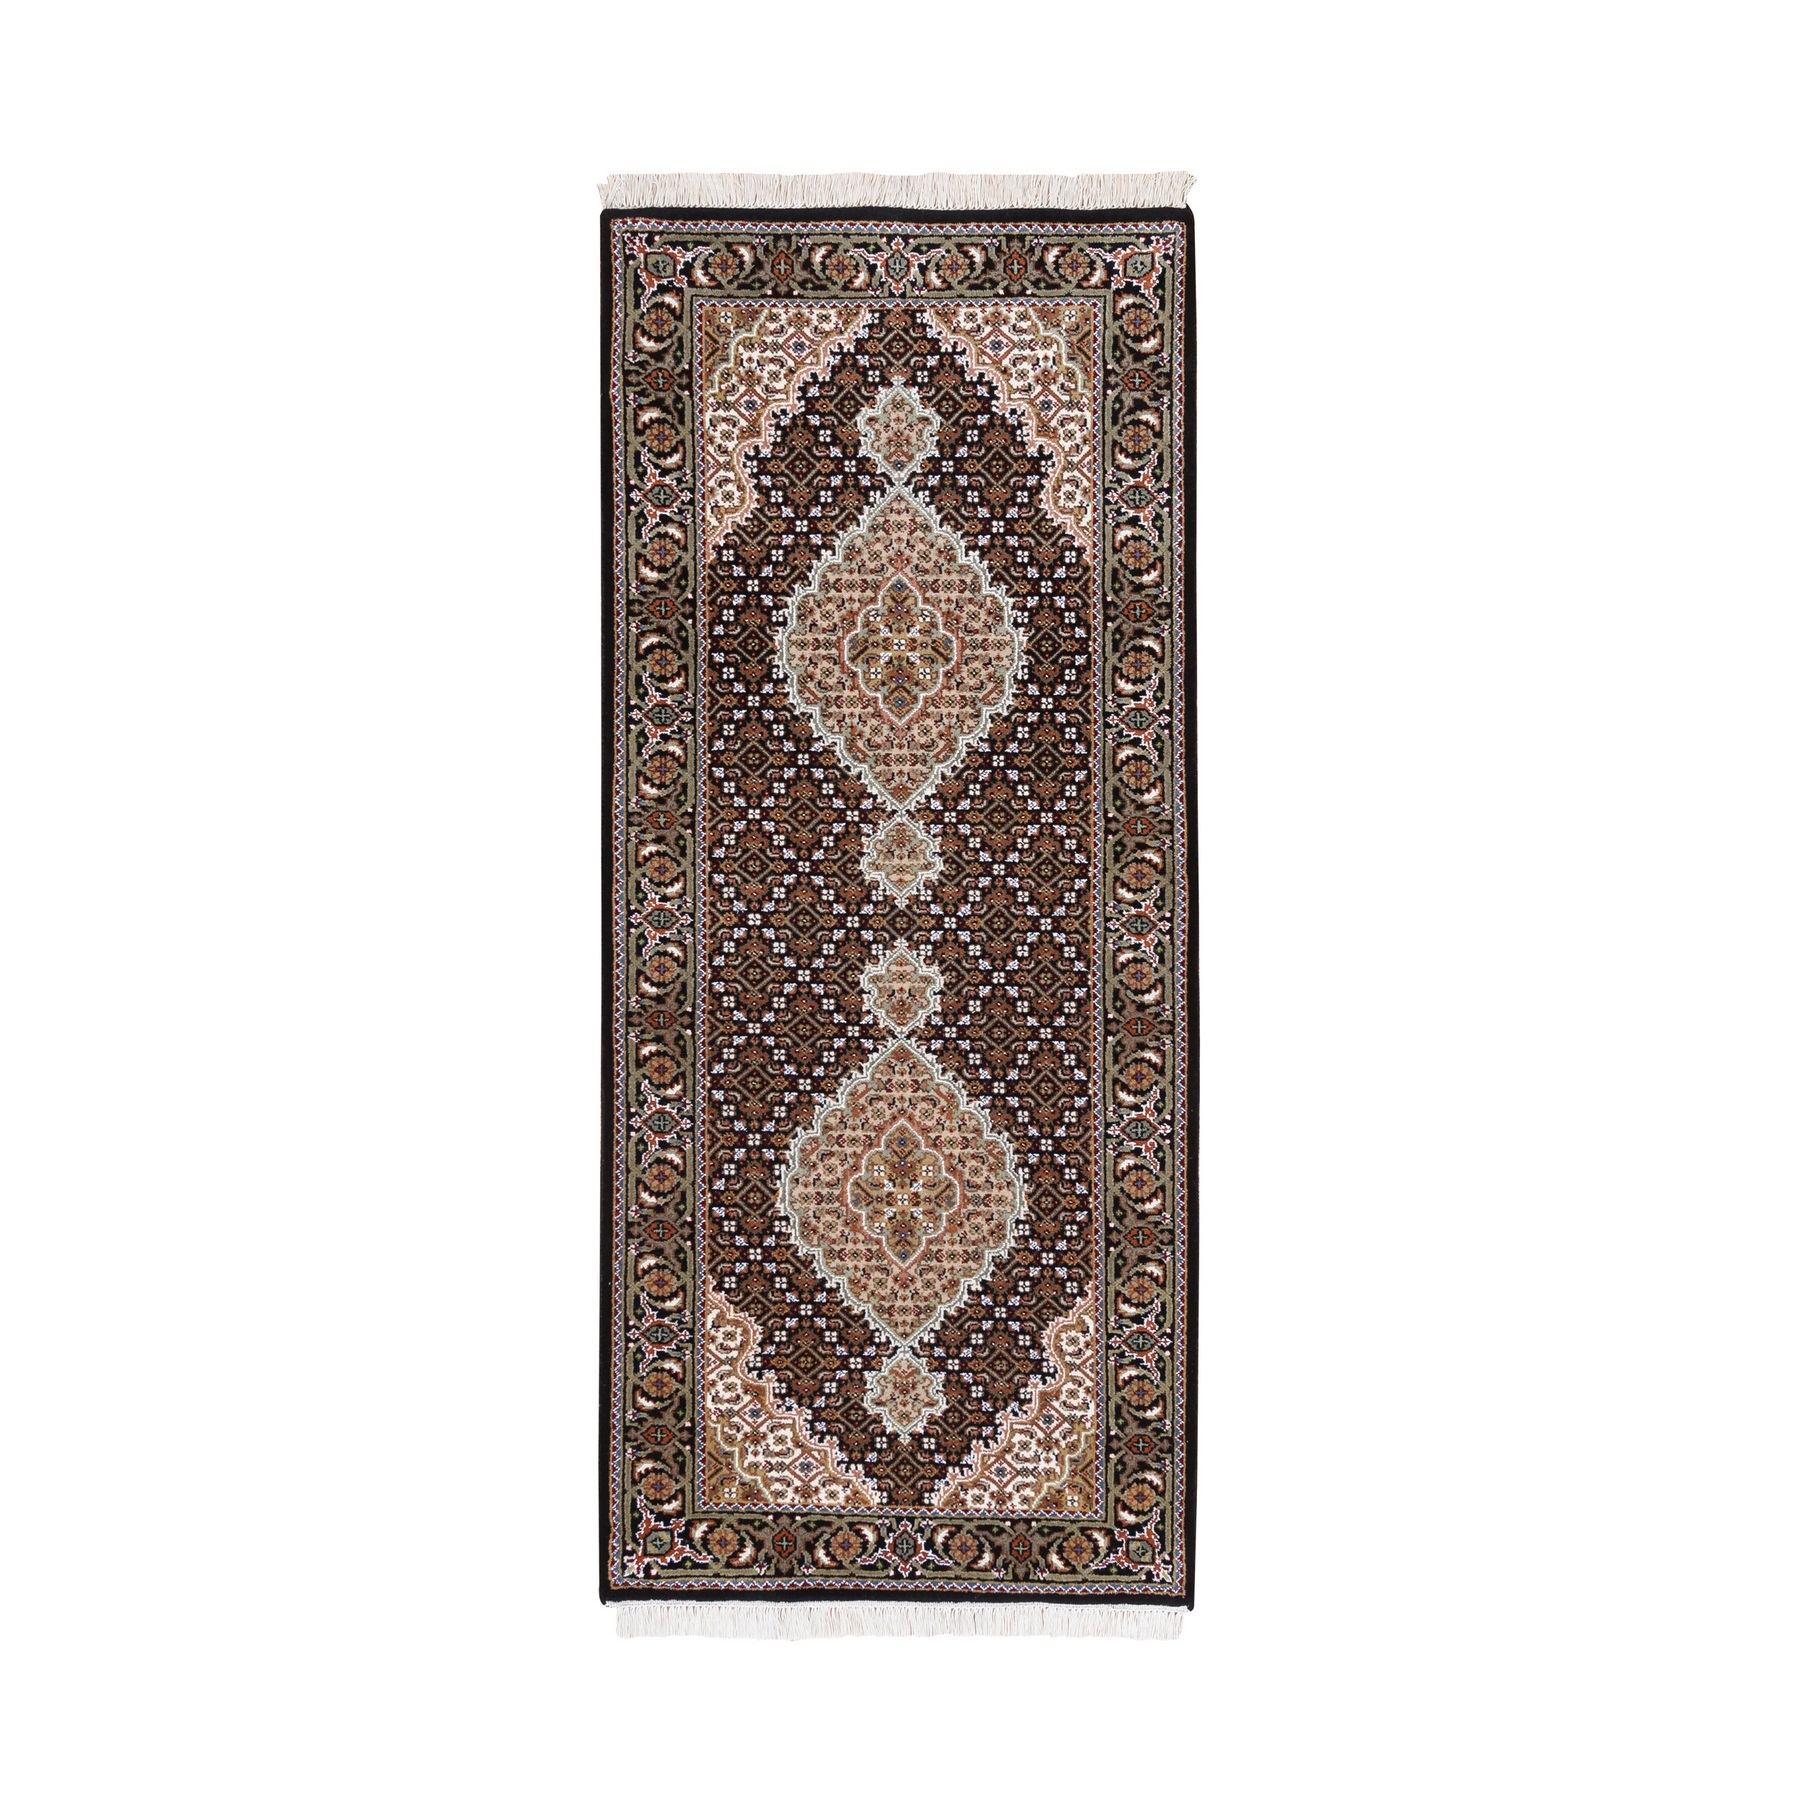 Pirniakan Collection Hand Knotted Black Rug No: 1125044